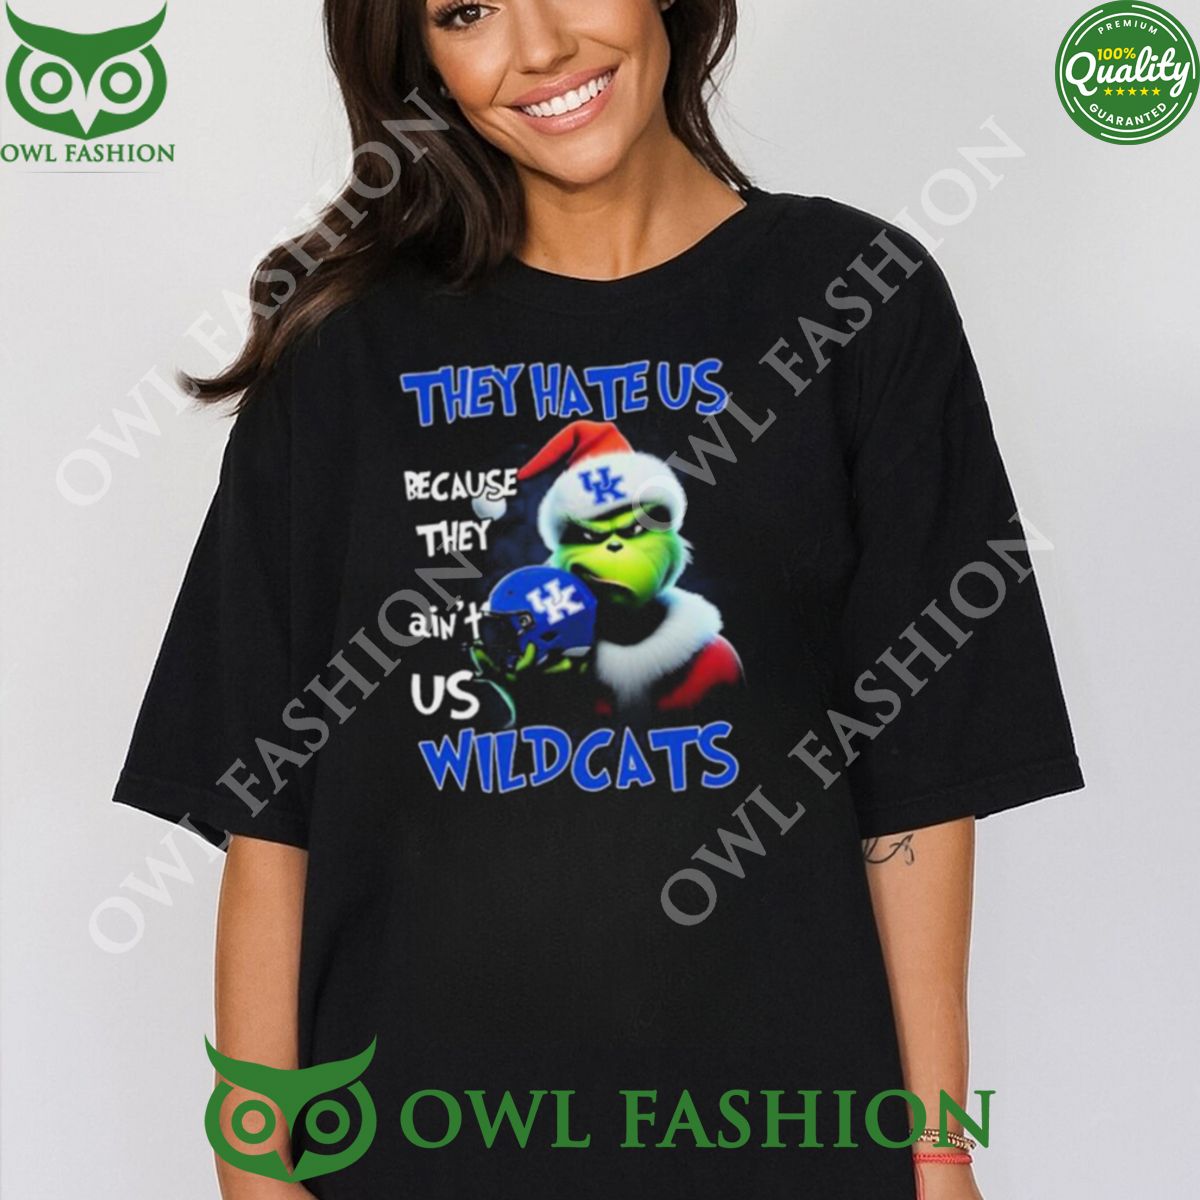 They Hate Us Because Ain’t Us Wildcats Santa Grinch Christmas t Shirt